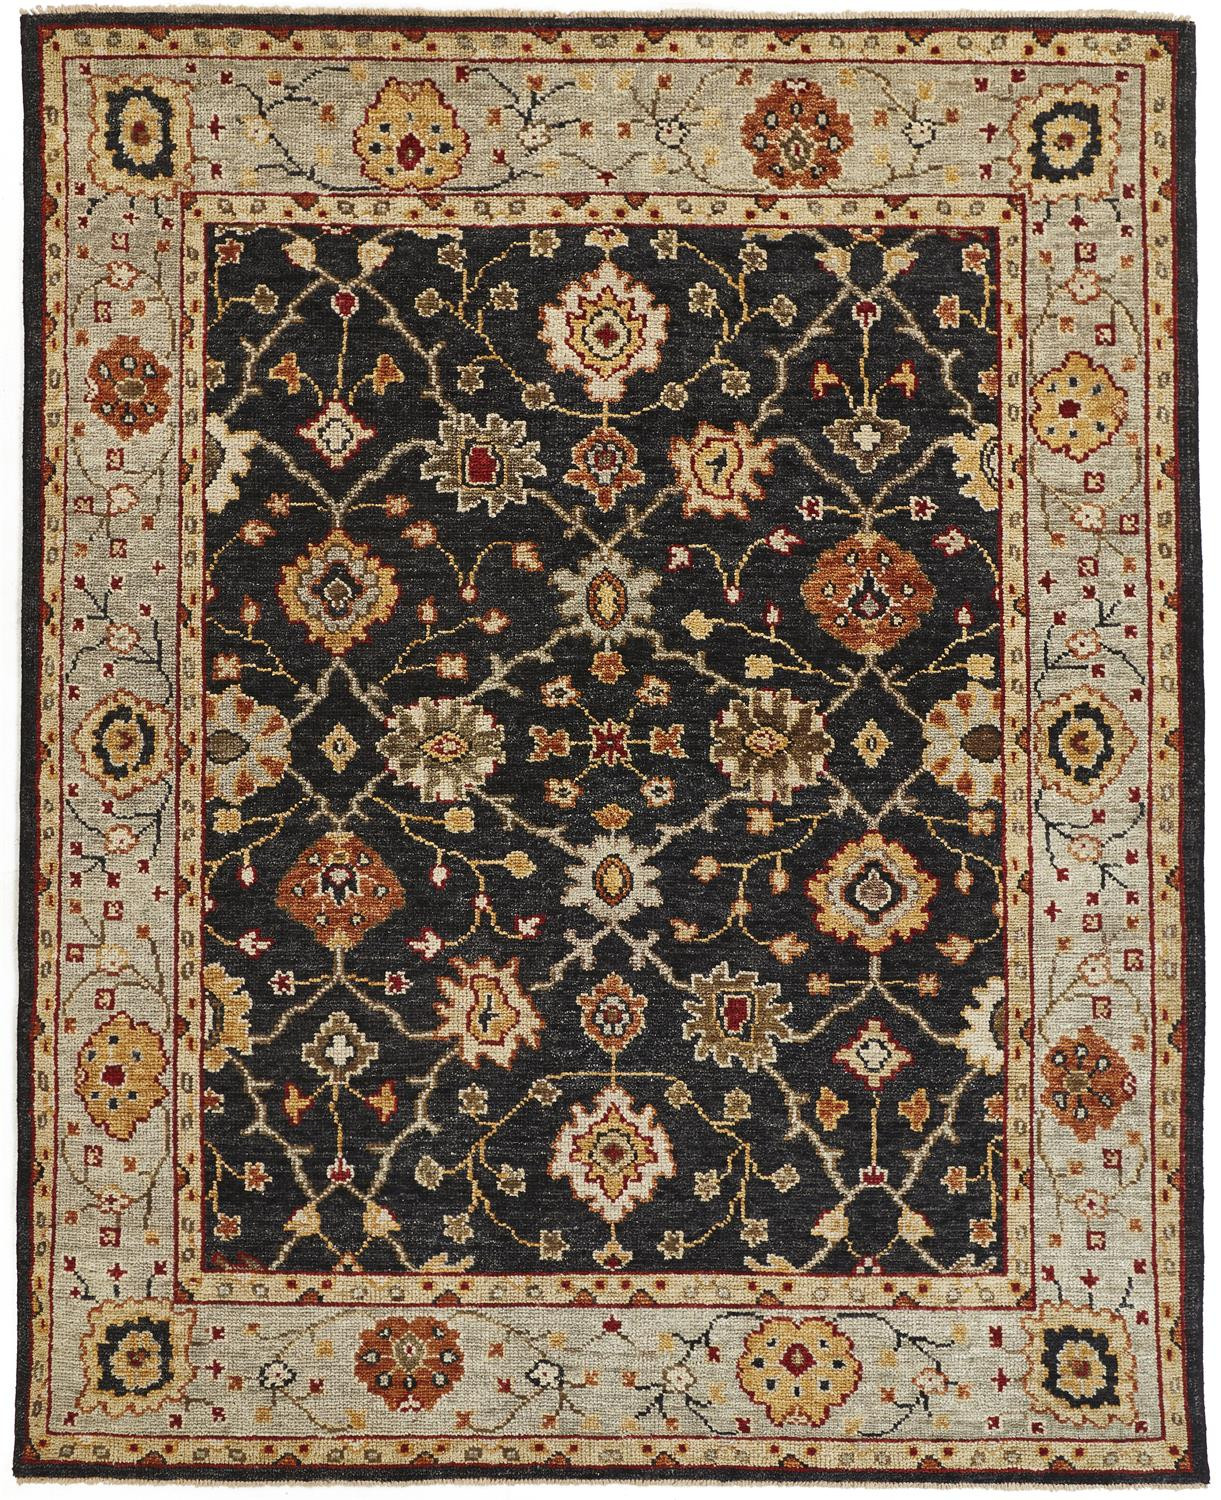 2' X 3' Black Gold And Gray Wool Floral Hand Knotted Stain Resistant Area Rug With Fringe-512603-1